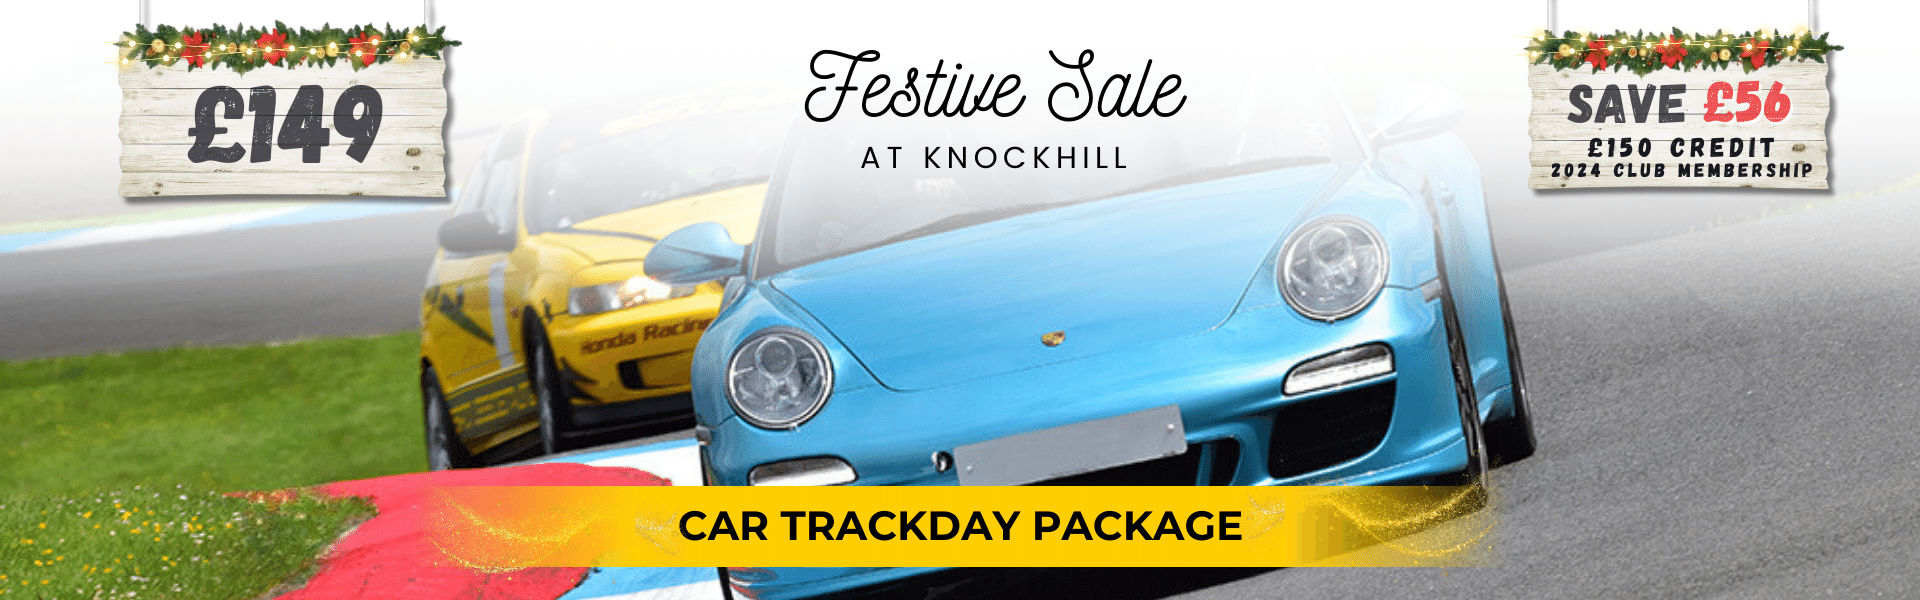 Car Trackday Package with £150 Credit